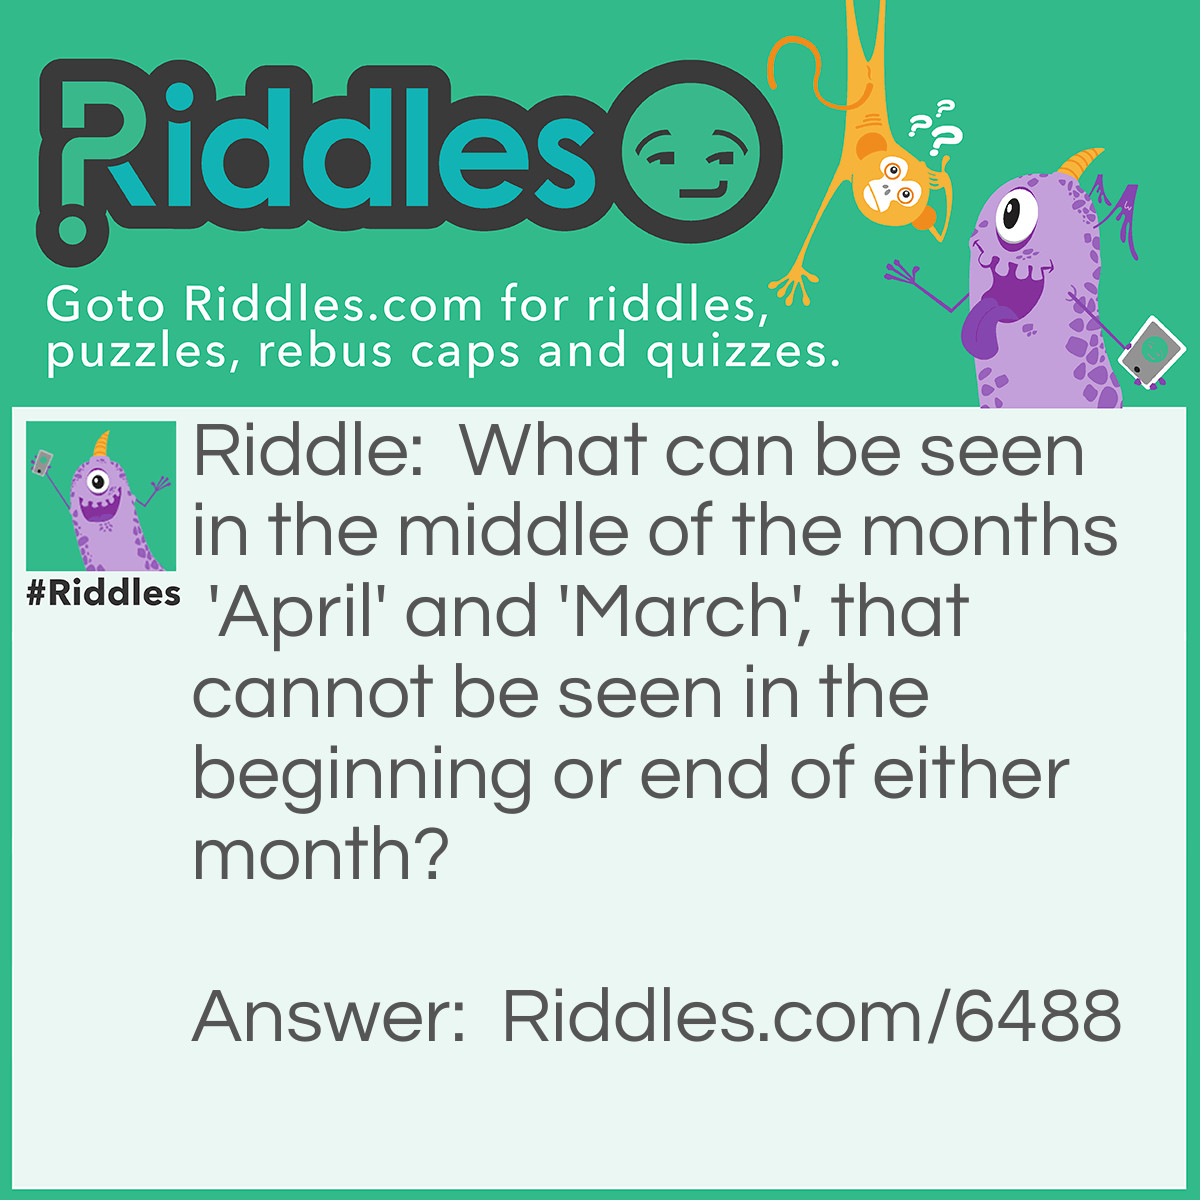 Riddle: What can be seen in the middle of the months 'April' and 'March', that cannot be seen in the beginning or end of either month? Answer: The letter R.